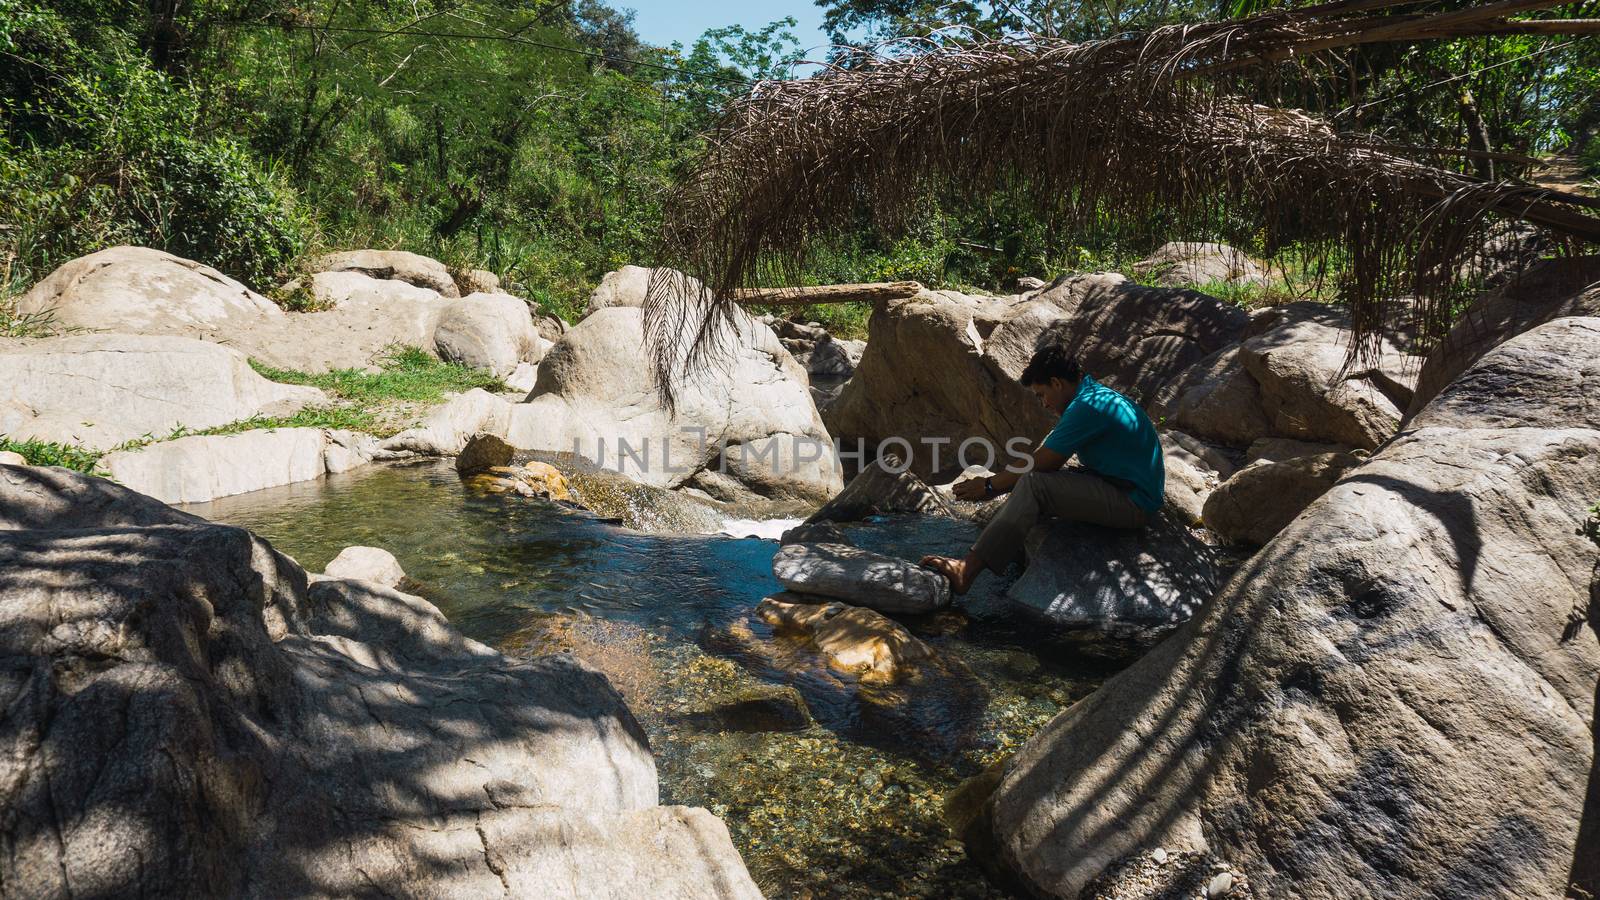 Man sitting in a rock and relaxing in the river